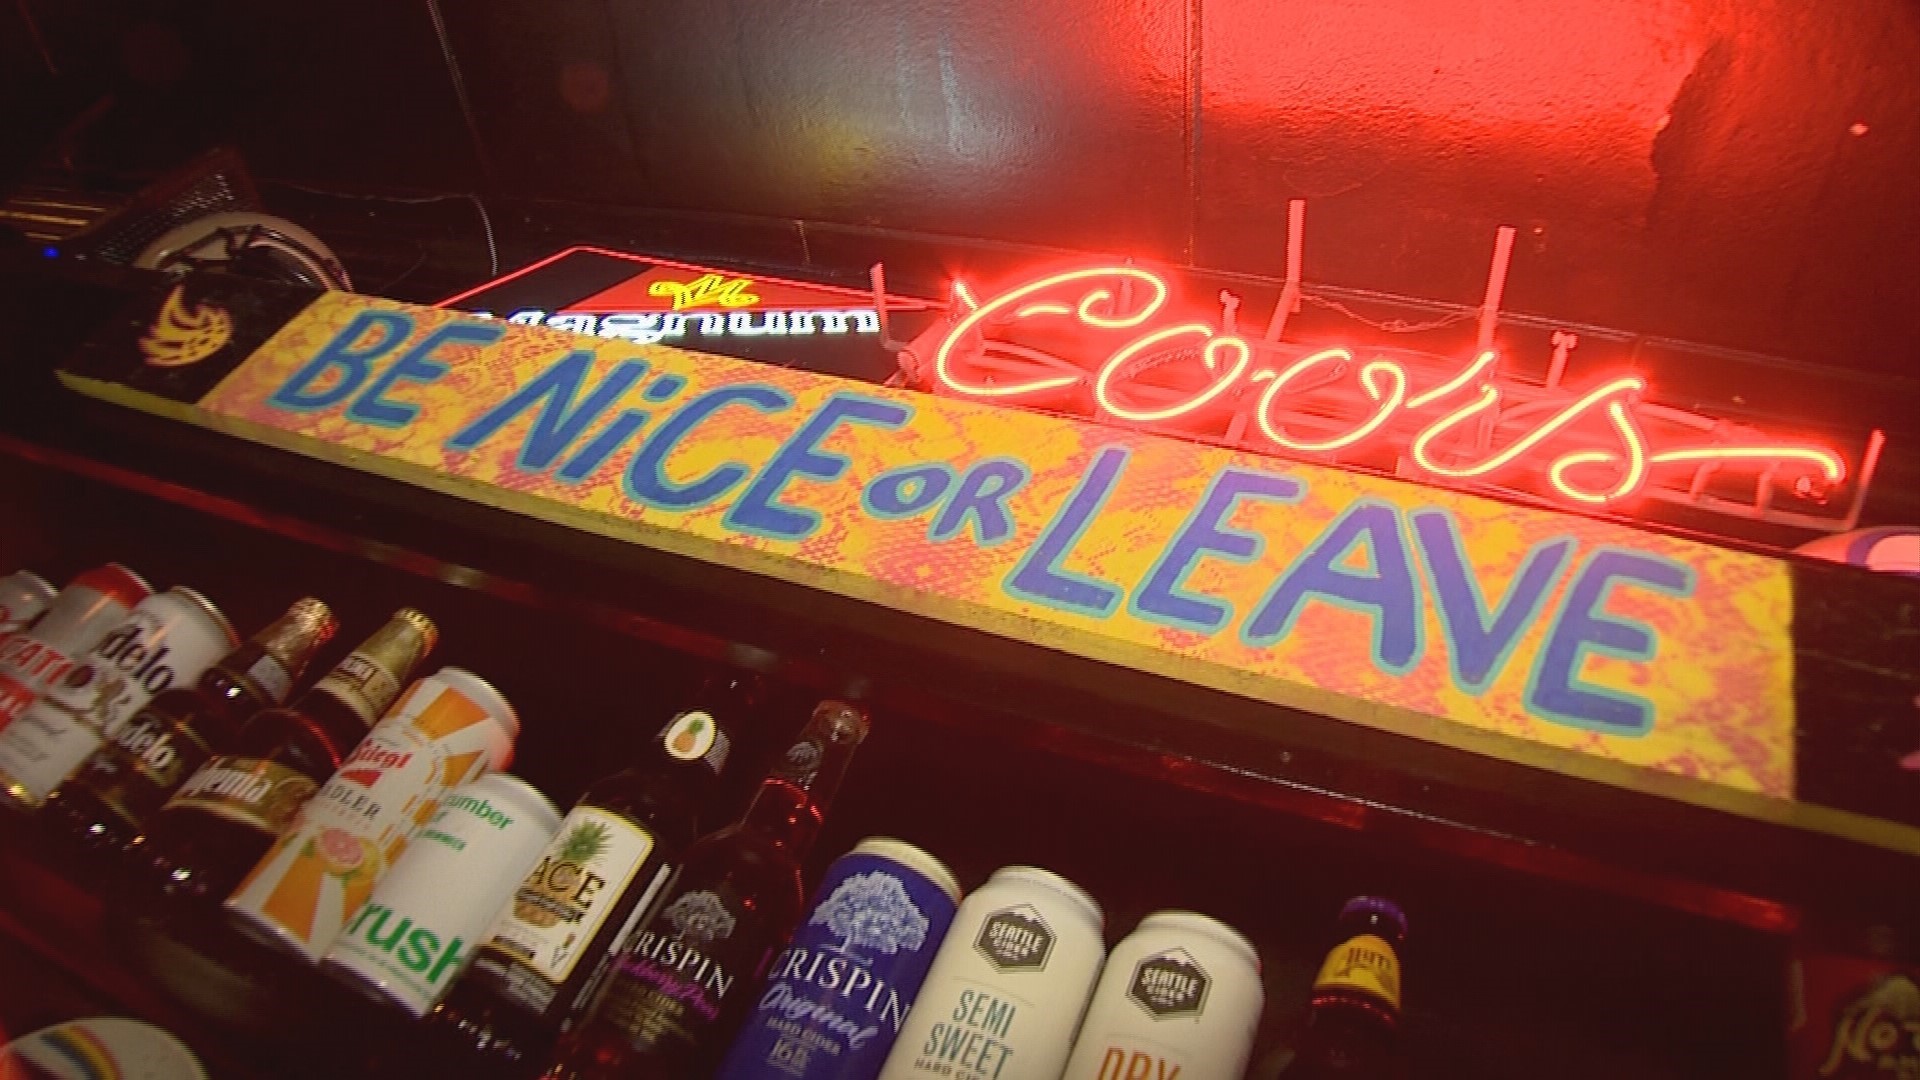 Daily happy hour and quality drinks make this un-divey dive bar a Tacoma staple.